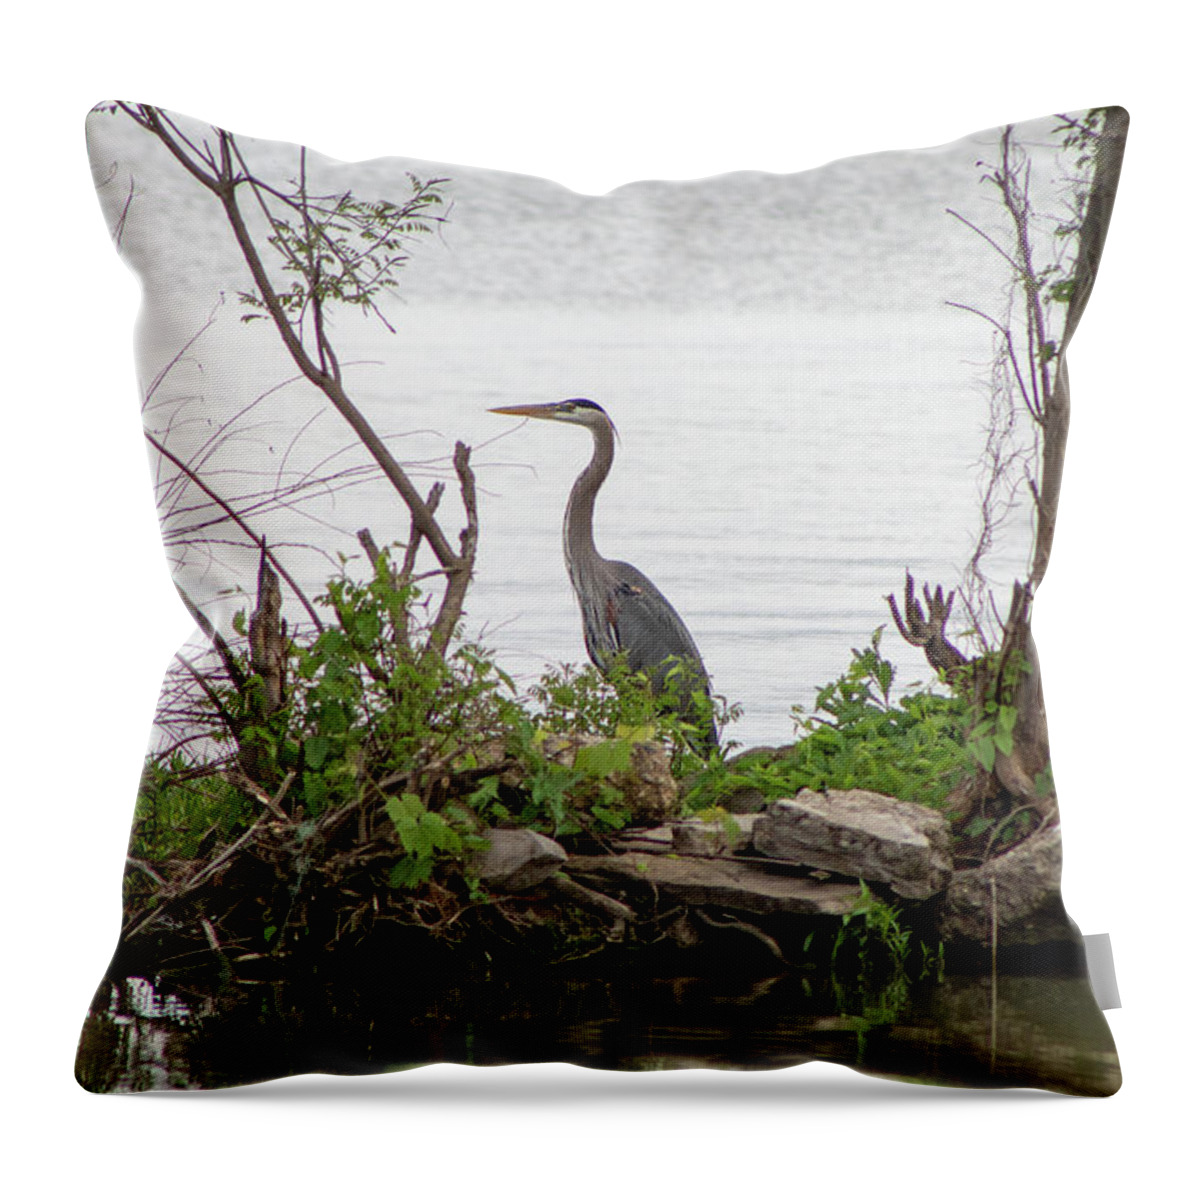  Throw Pillow featuring the photograph Blue Heron by Brian Jones